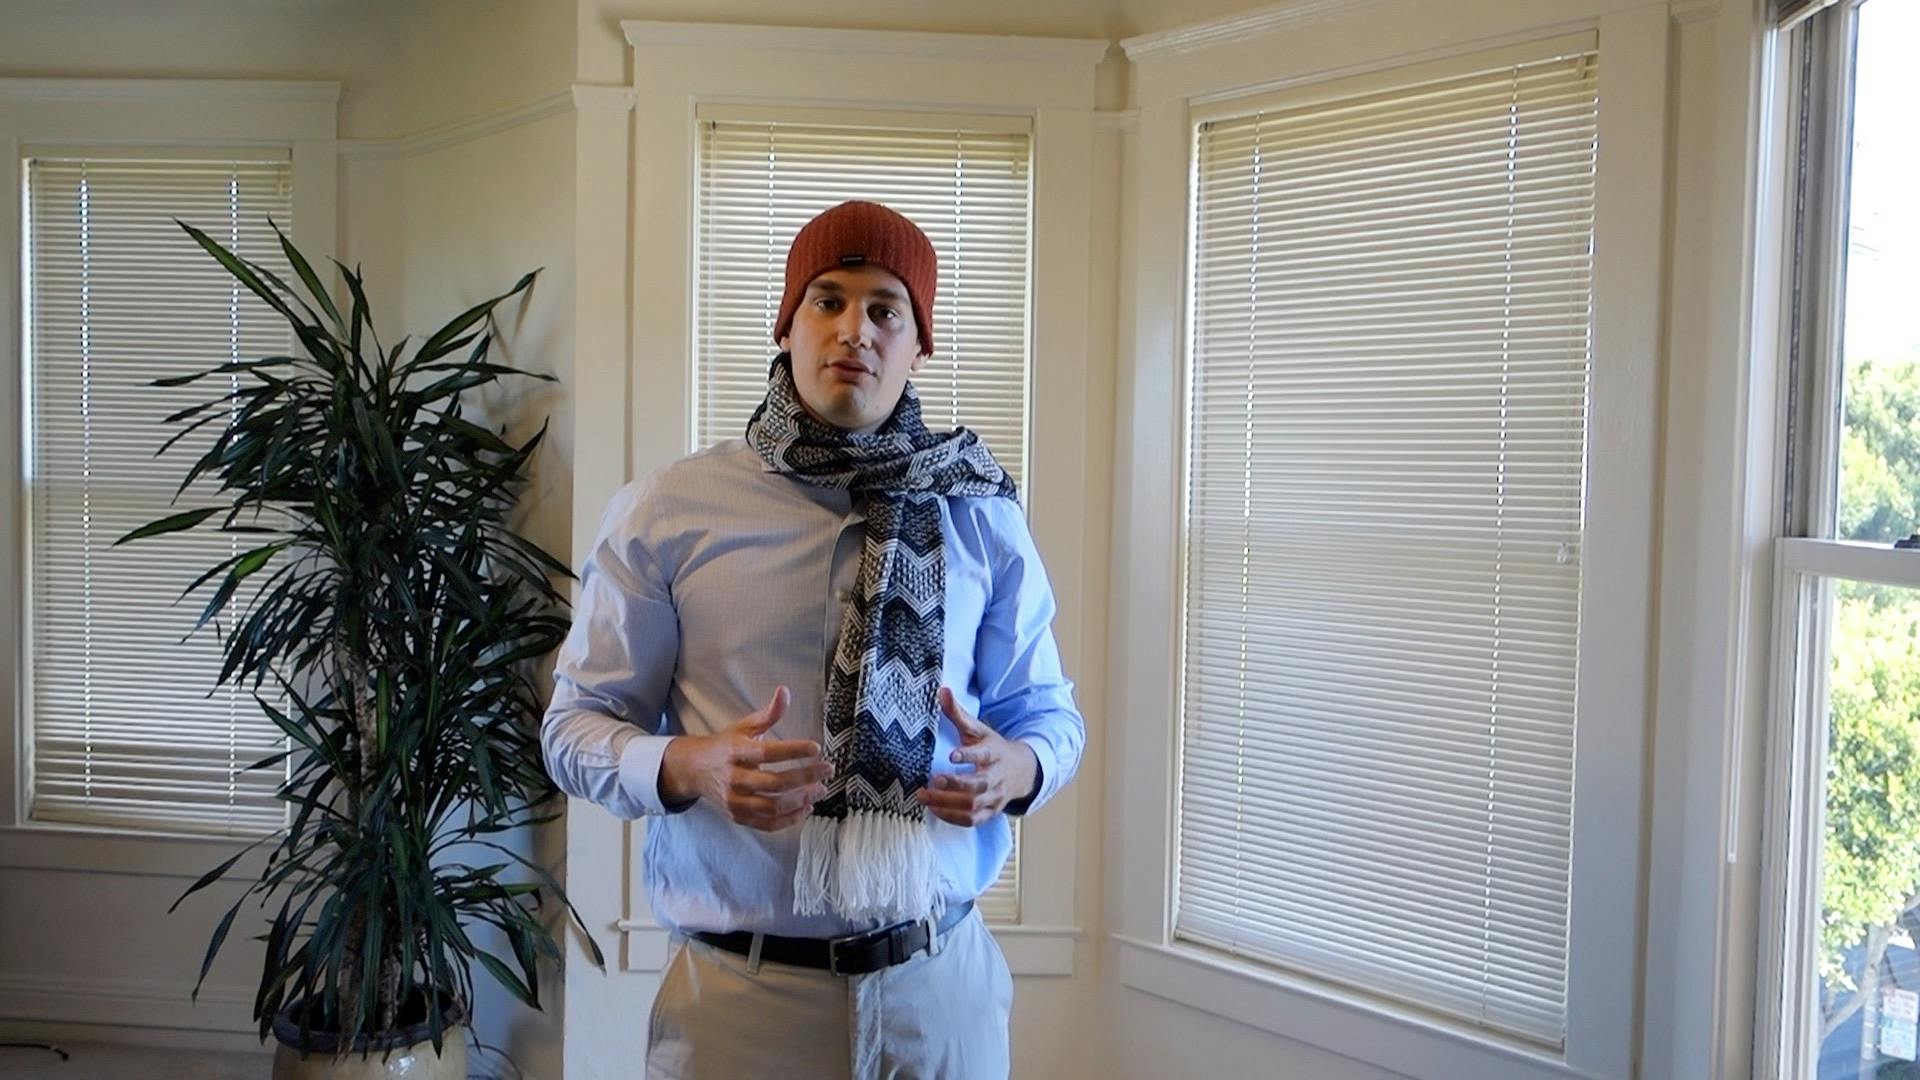 Daniel Petkevich demonstrates Medicare coverage by using a scarf and hat as a metaphor